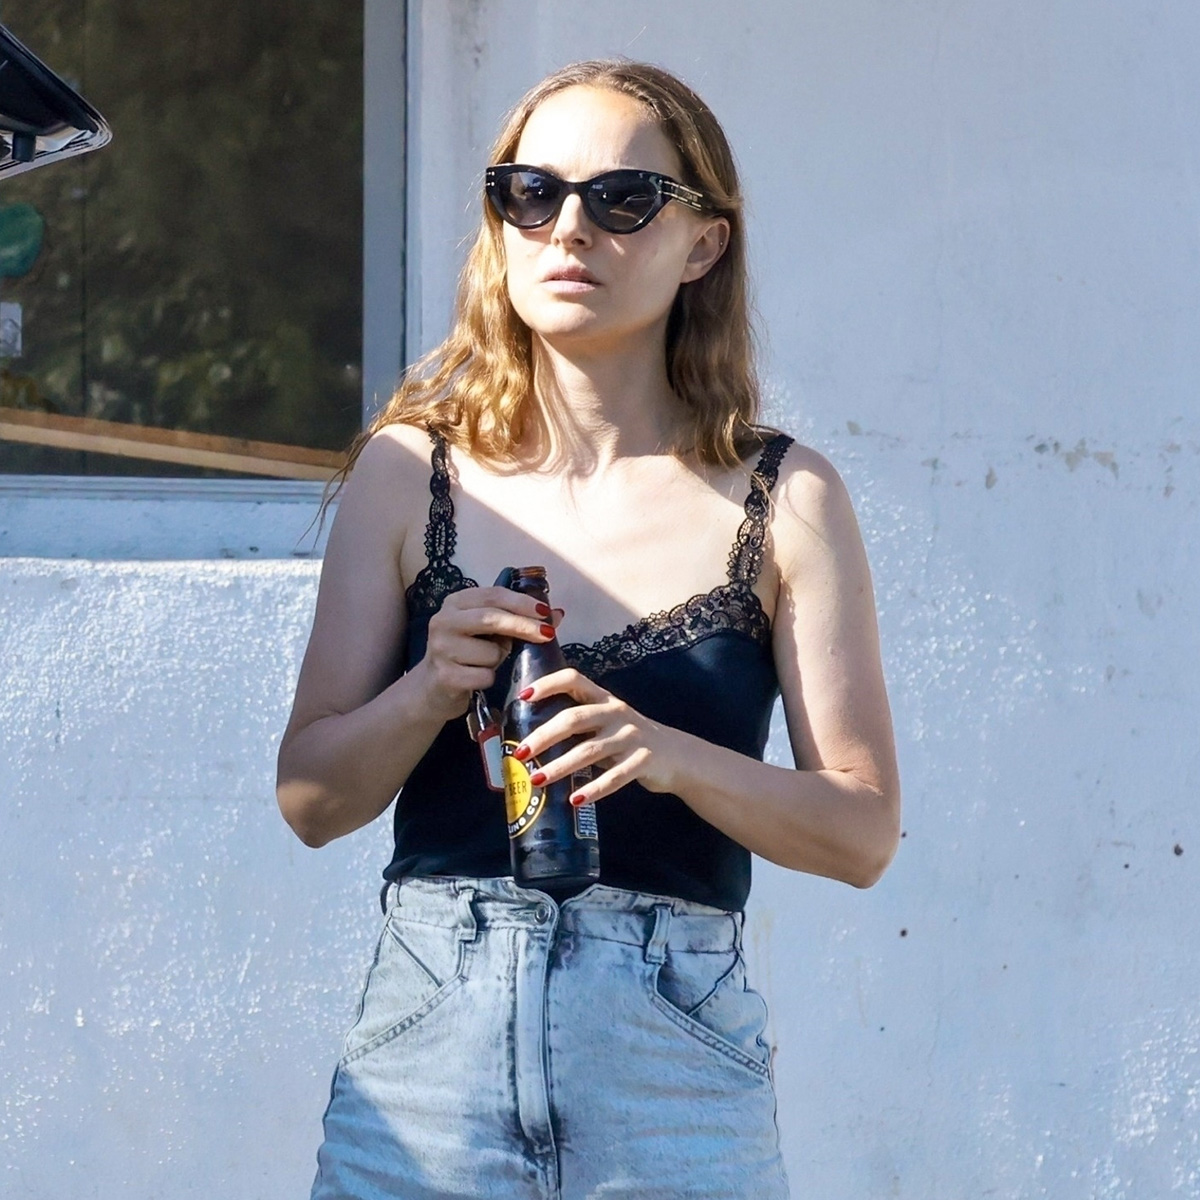 Natalie Portman Just Wore the $50 Birkenstocks That Sell Out Every Summer